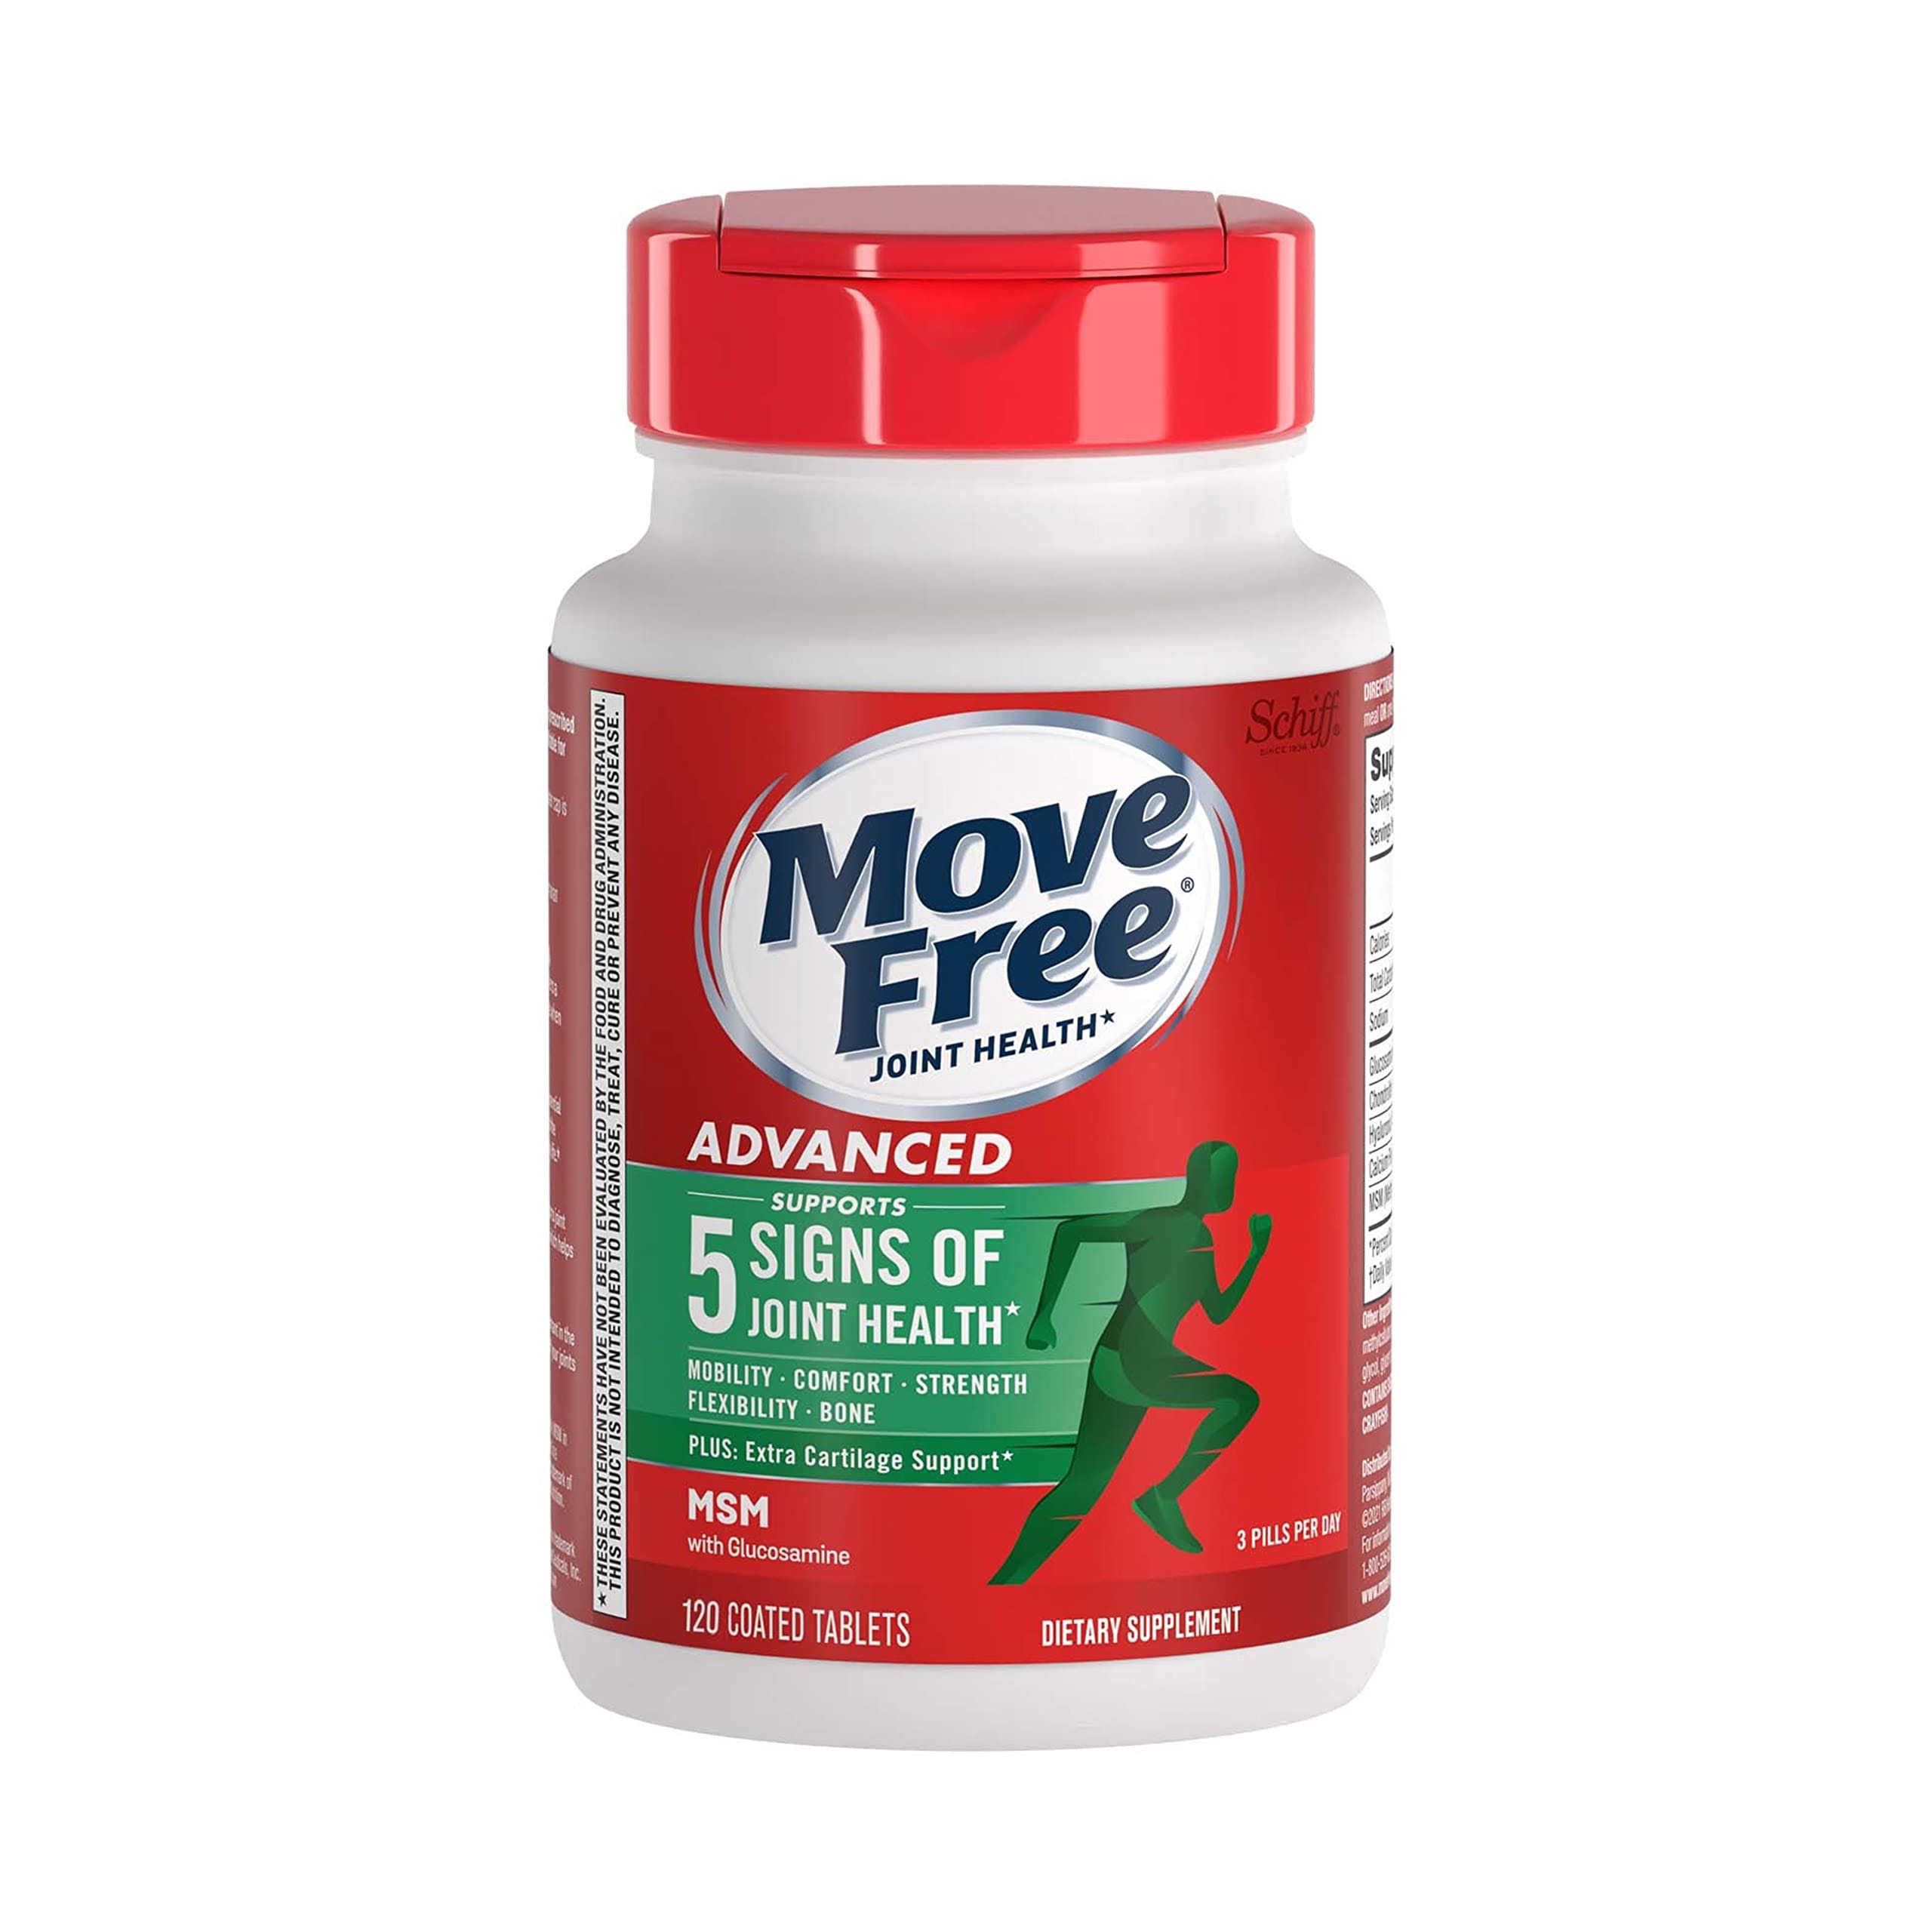 Schiff Move Free Joint Health Supplement - 120 Count